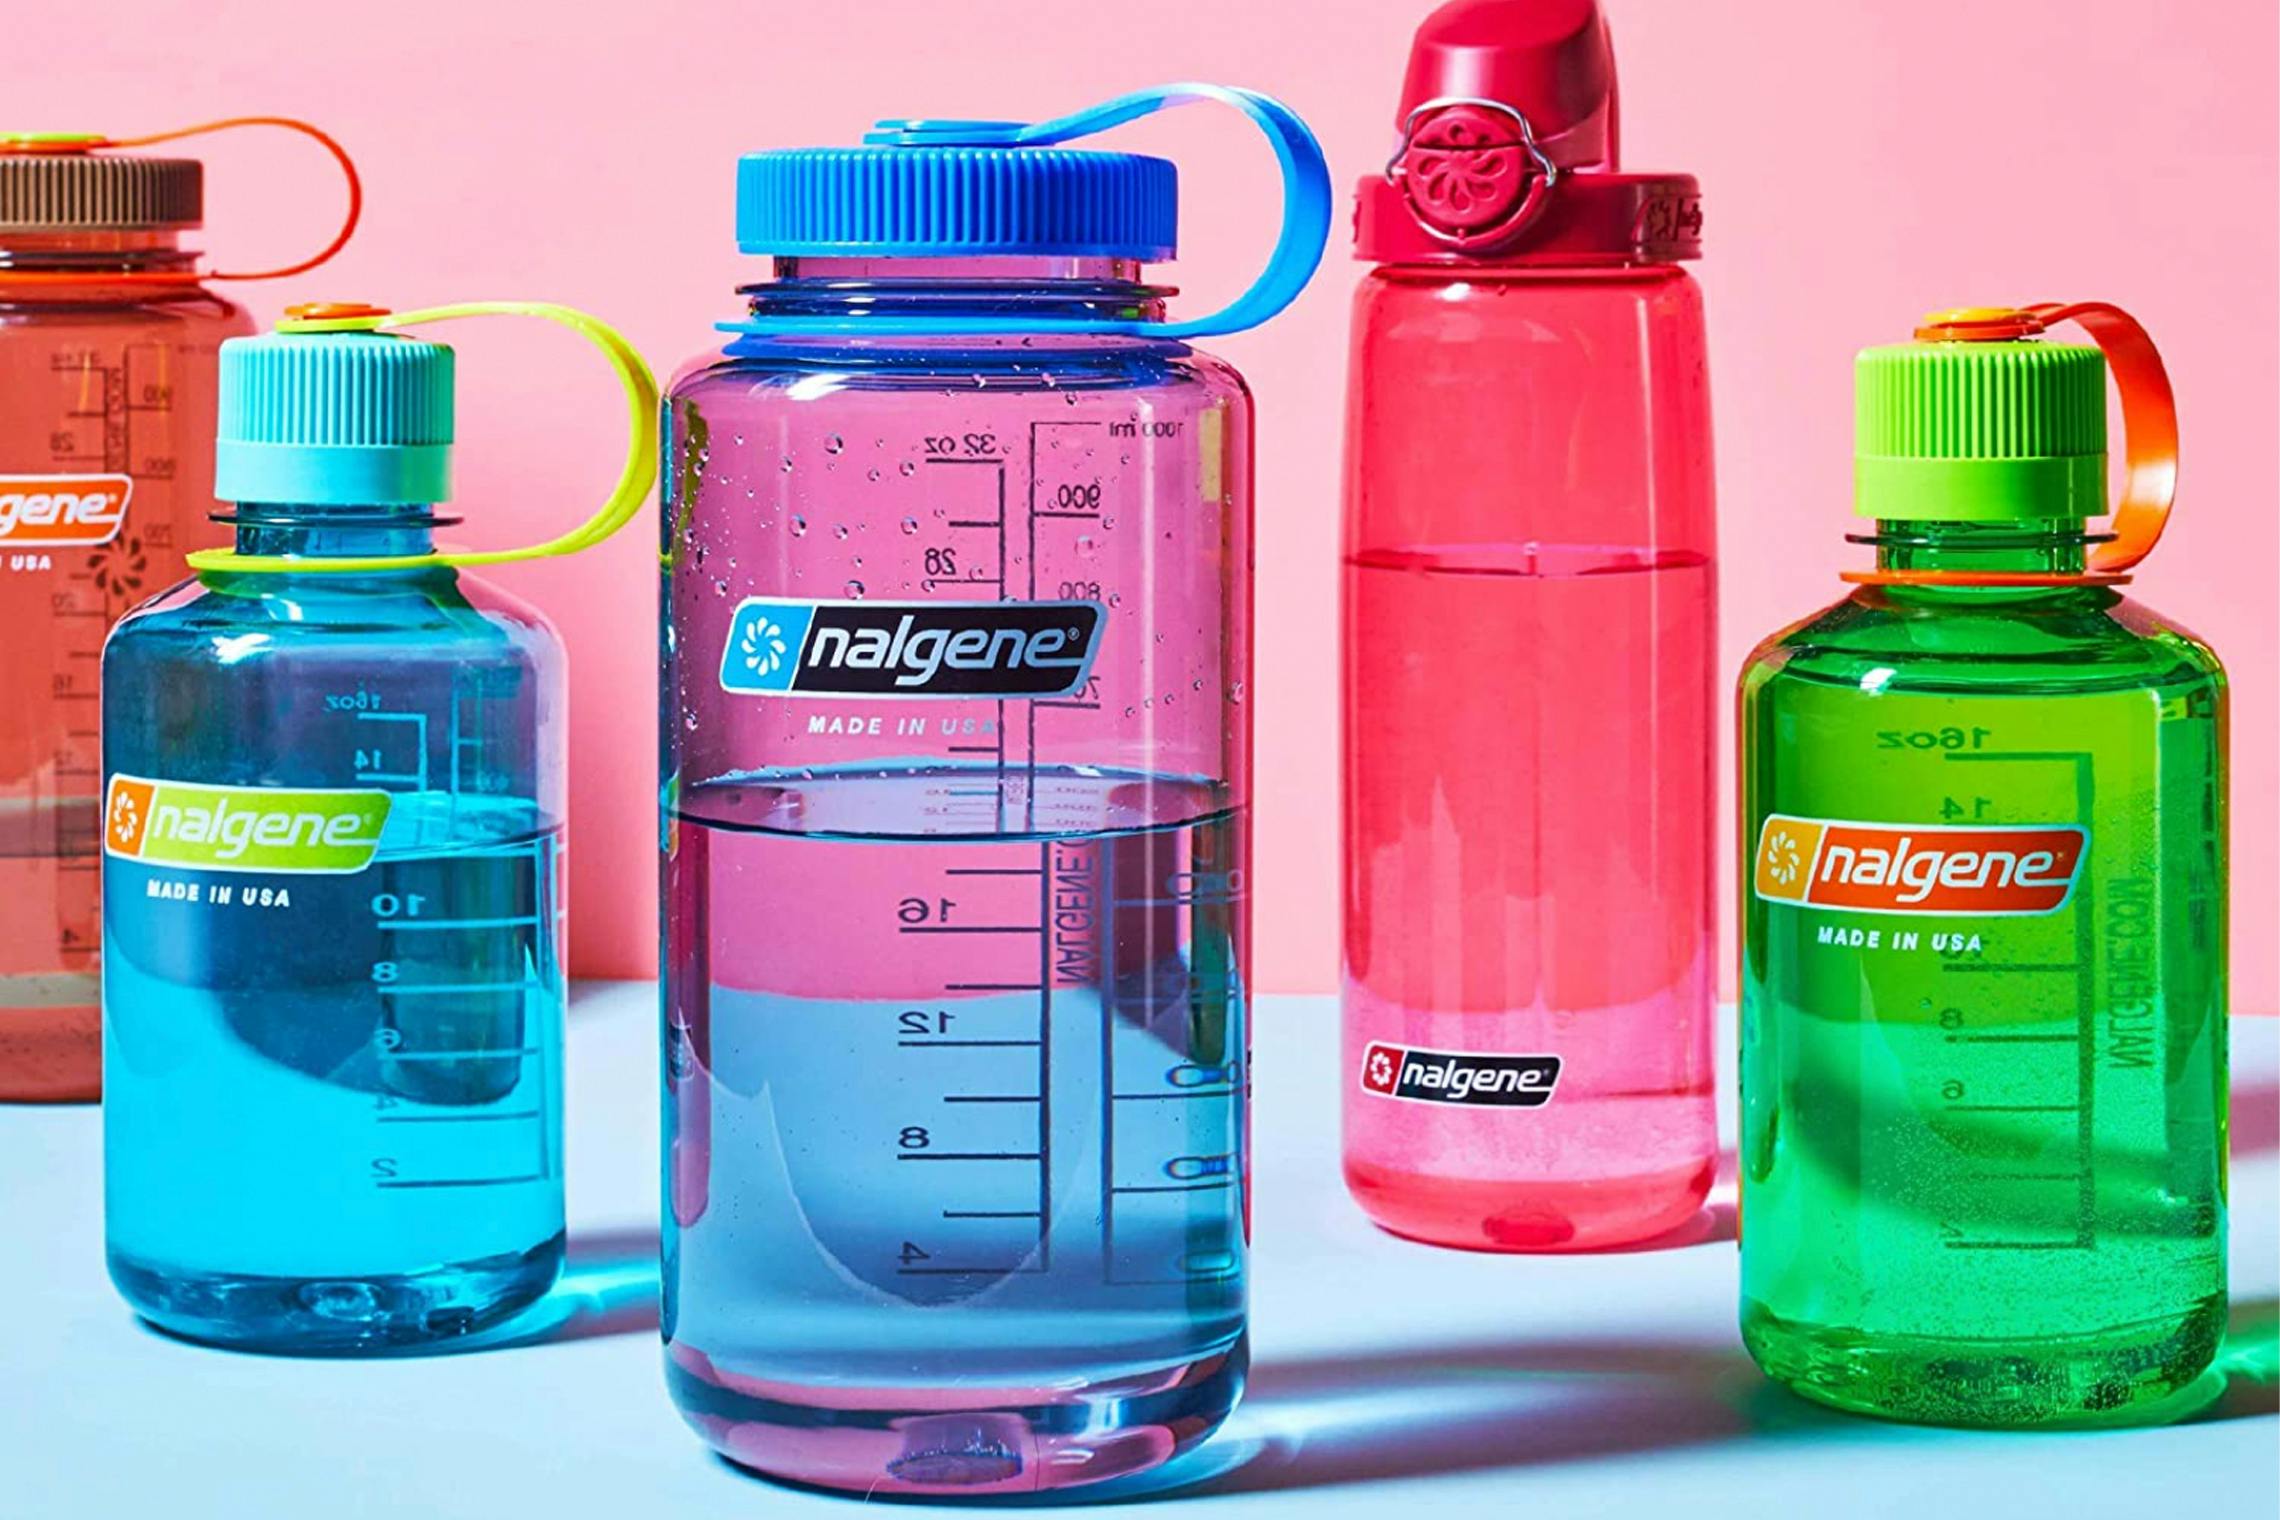 5 Nalgene water bottles in front of a pink background